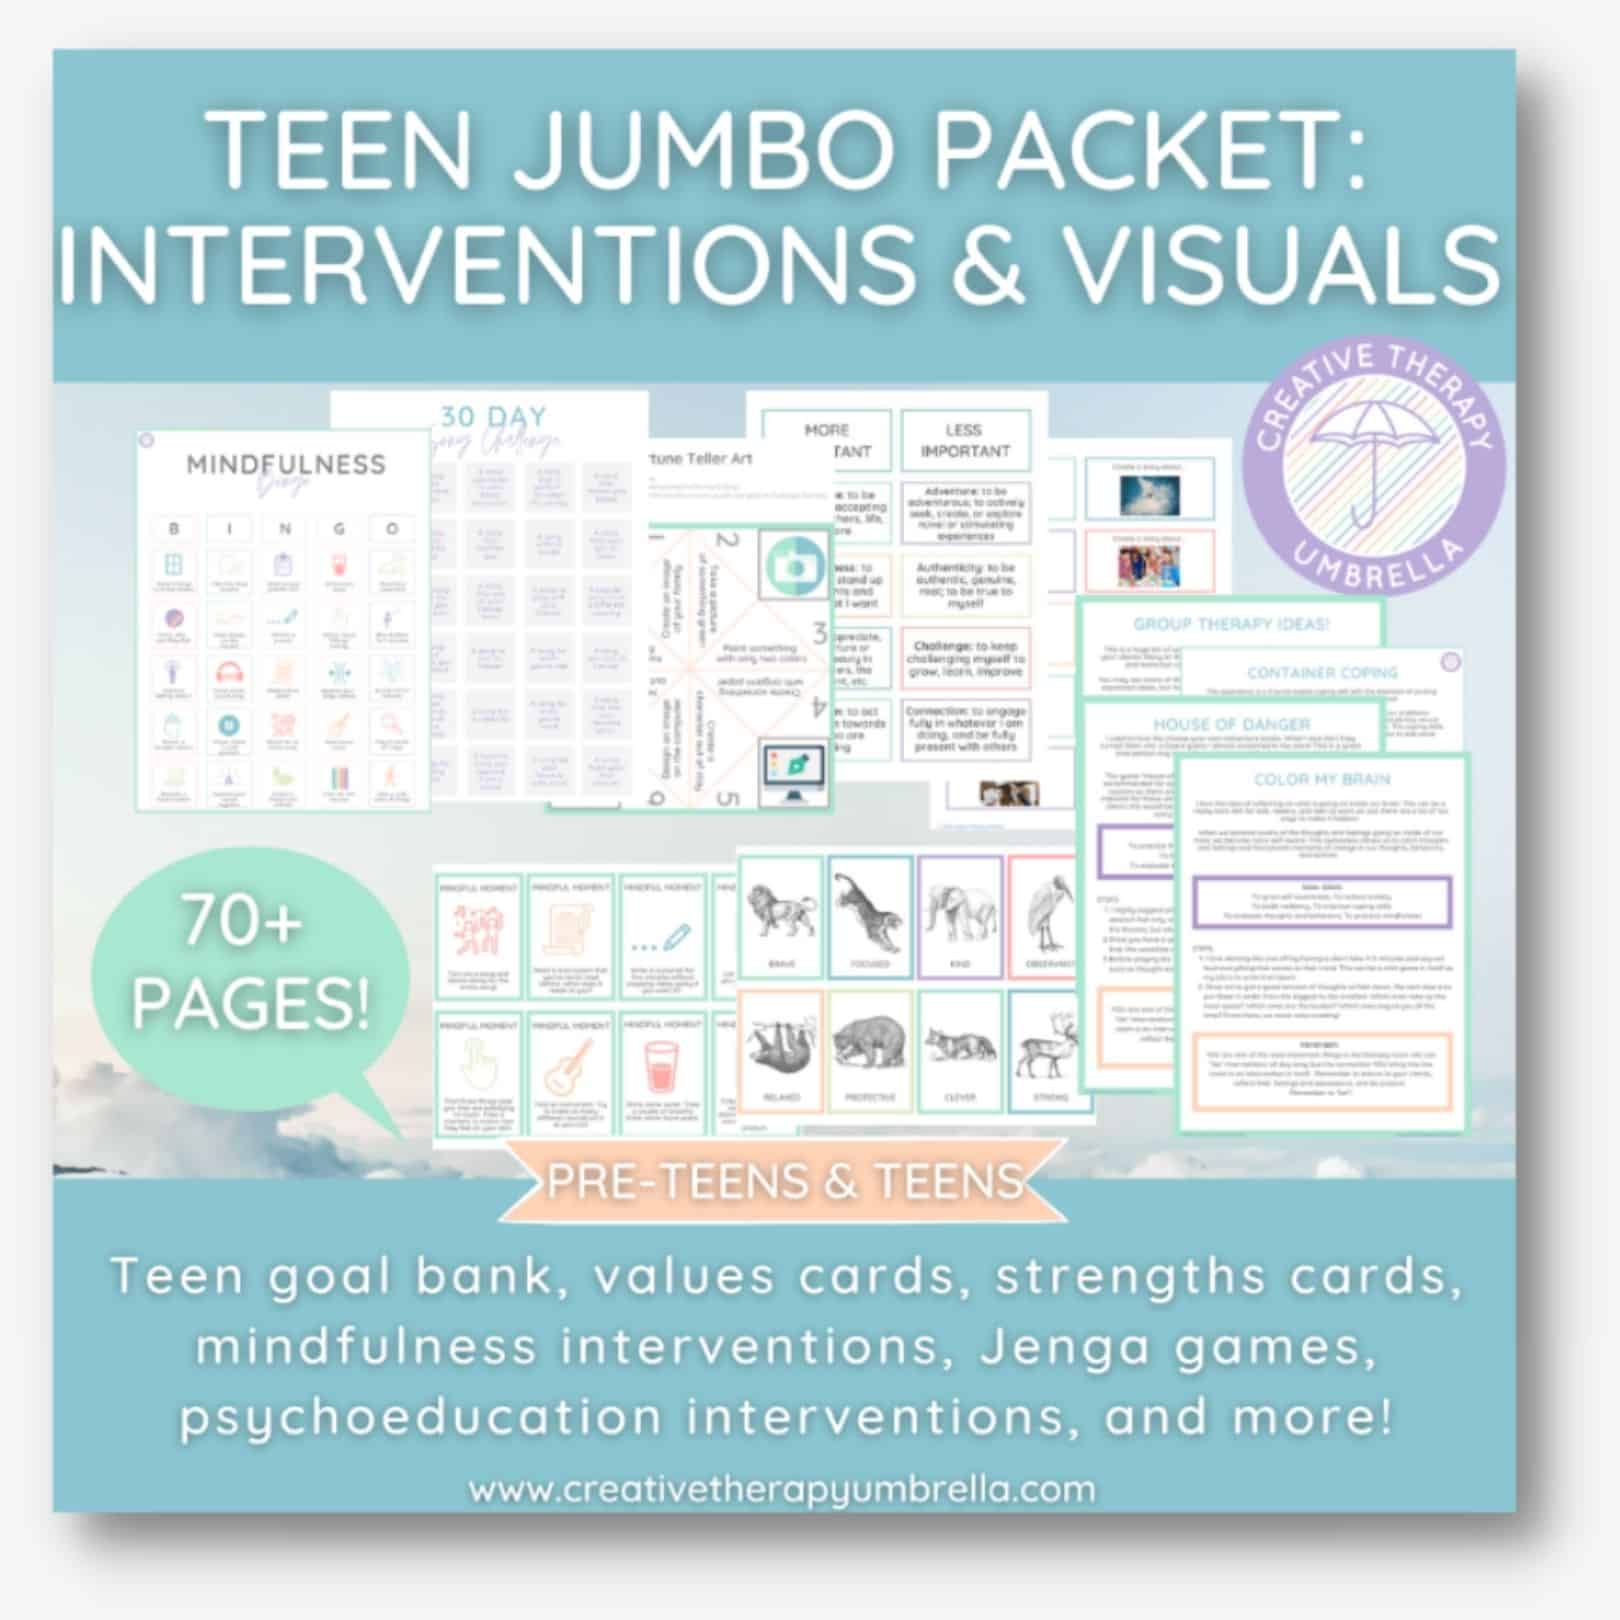 Creative Therapy Umbrella Teen Jumbo Packet Intervetions and Visuals Music Therapy